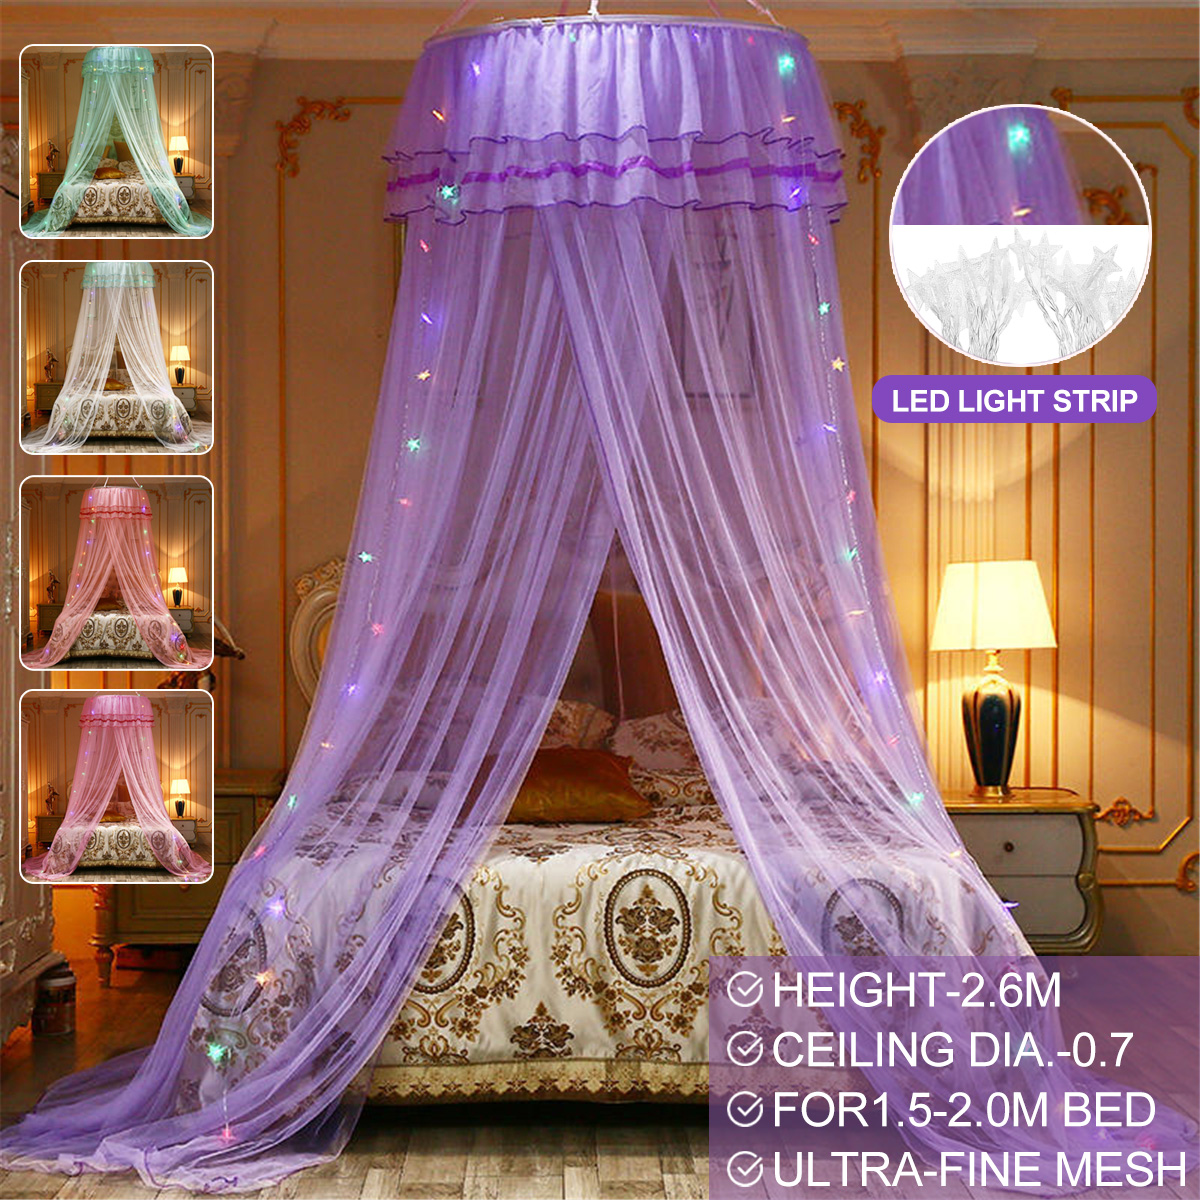 Ceiling-Mounted-Mosquito-Net-Free-Installation-Home-Dome-Foldable-Bed-Canopy-with-LED-String-Light-1806505-1